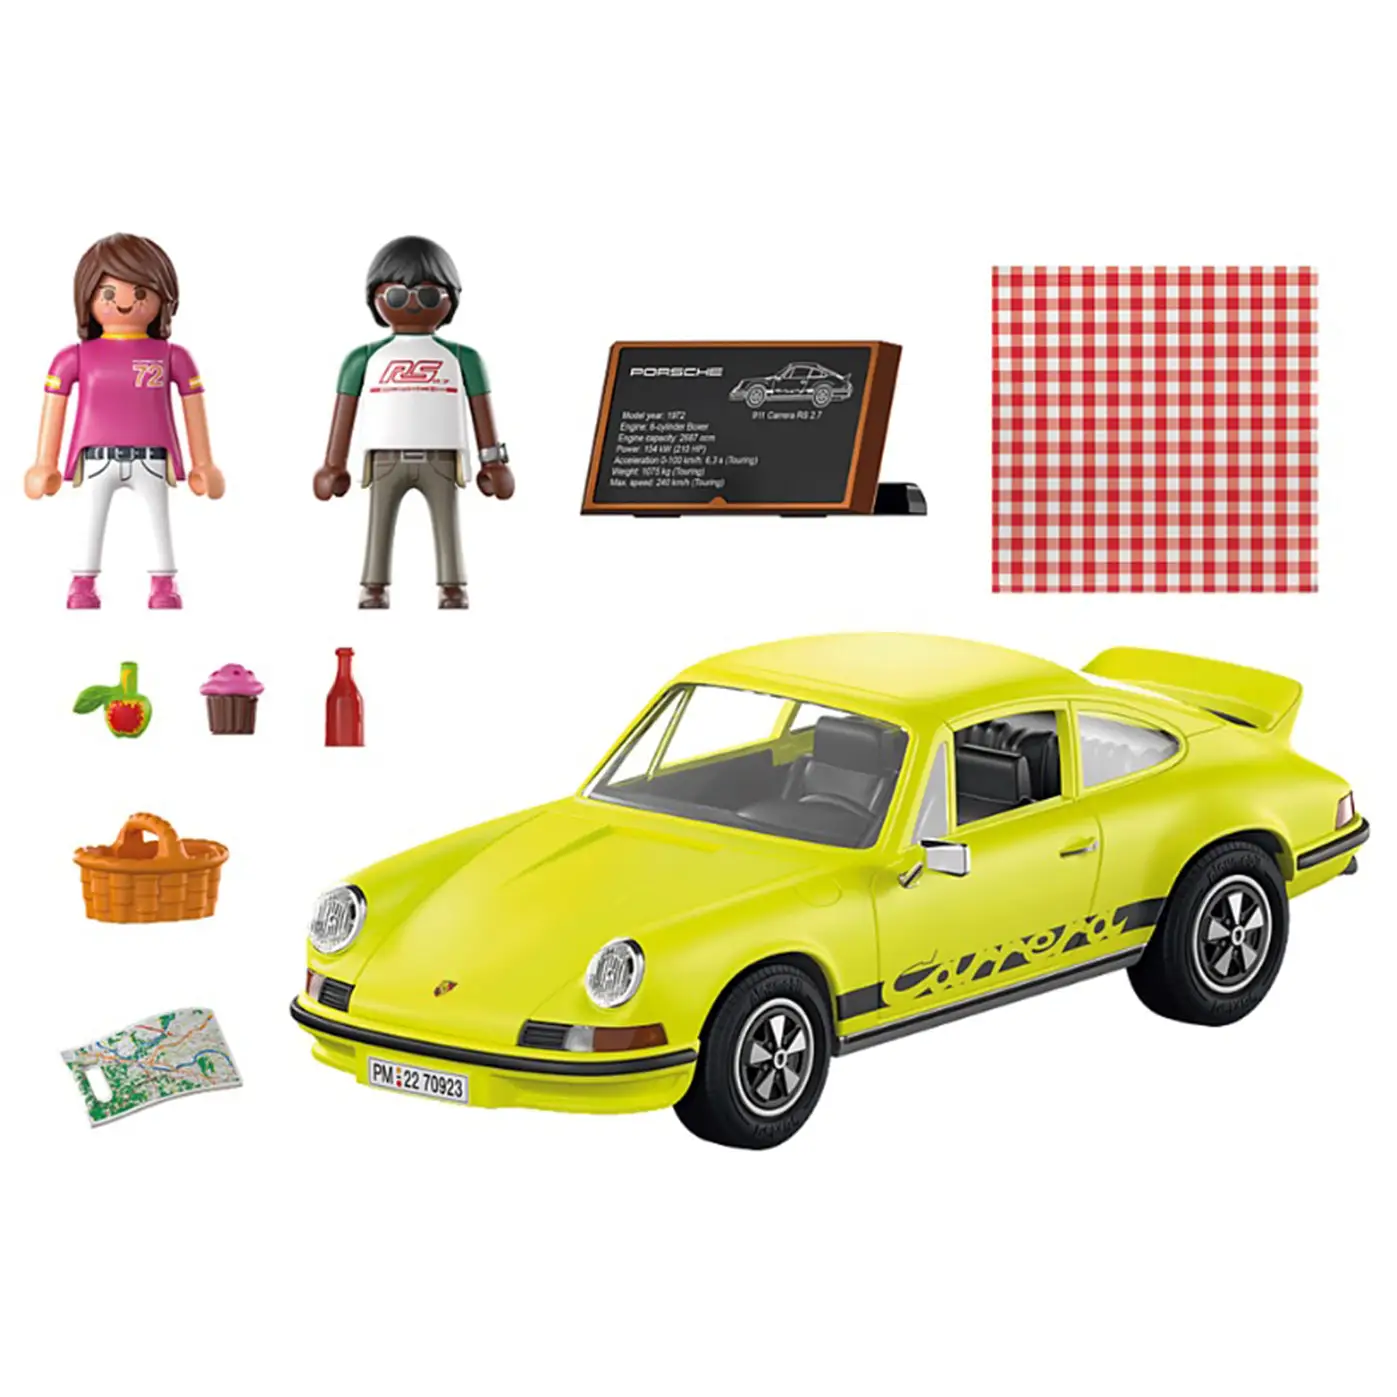 Playmobil Porsche 911 Carrera RS 2.7 70923 (for Kids 5 Years Old